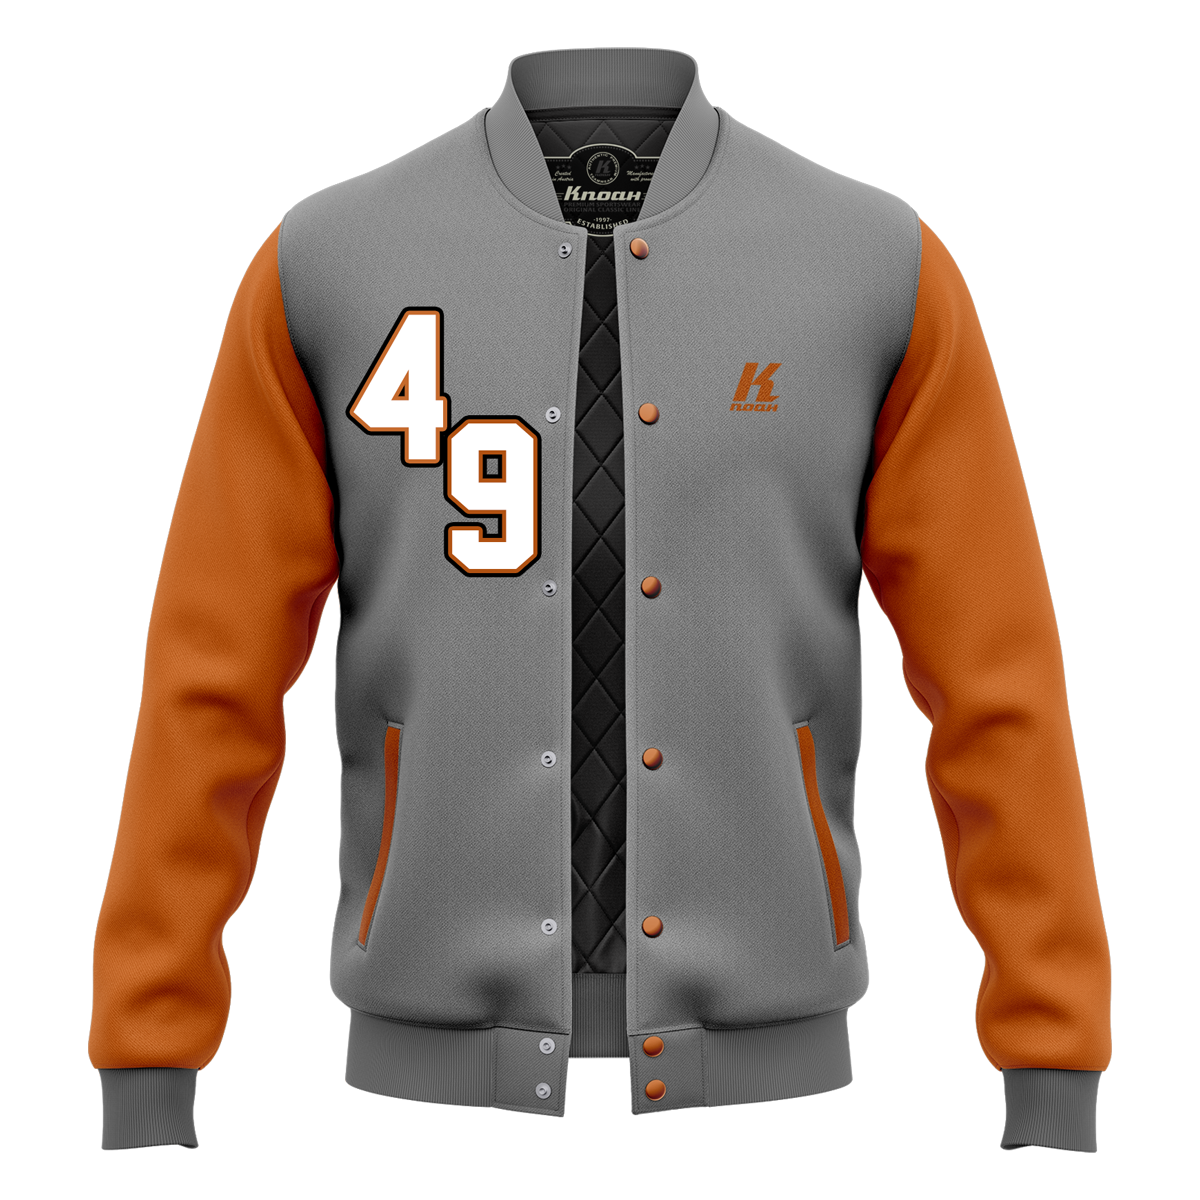 Day 14: "Bunny Bad" Authentic Varsity Jacket with Playernumber/Initials